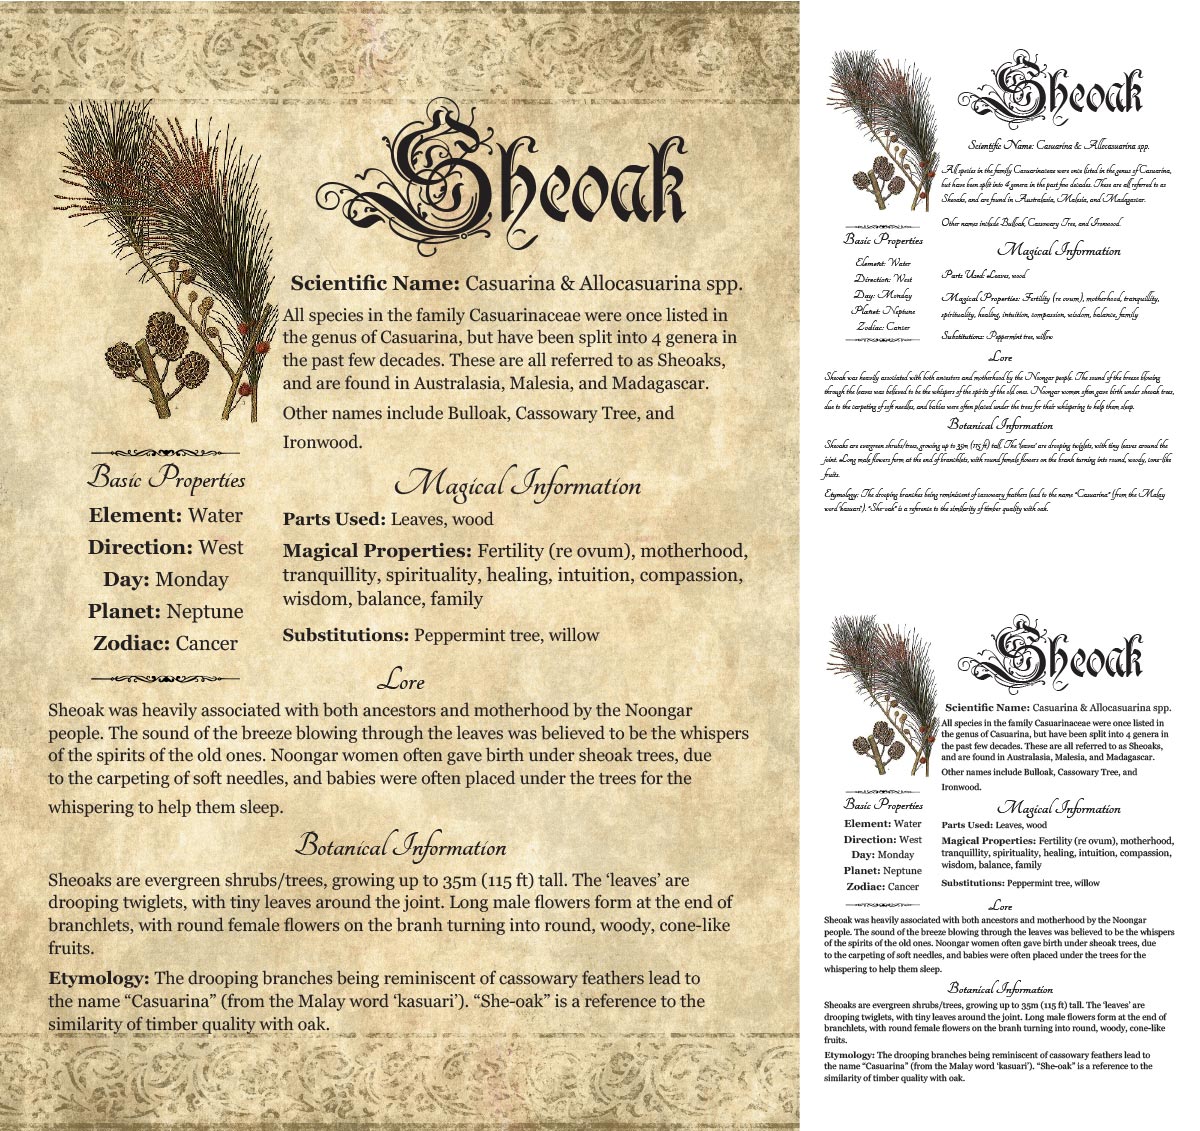 Collage of 3 versions of the Sheoak grimoire page: with a readable/serif vs script font + with/without background